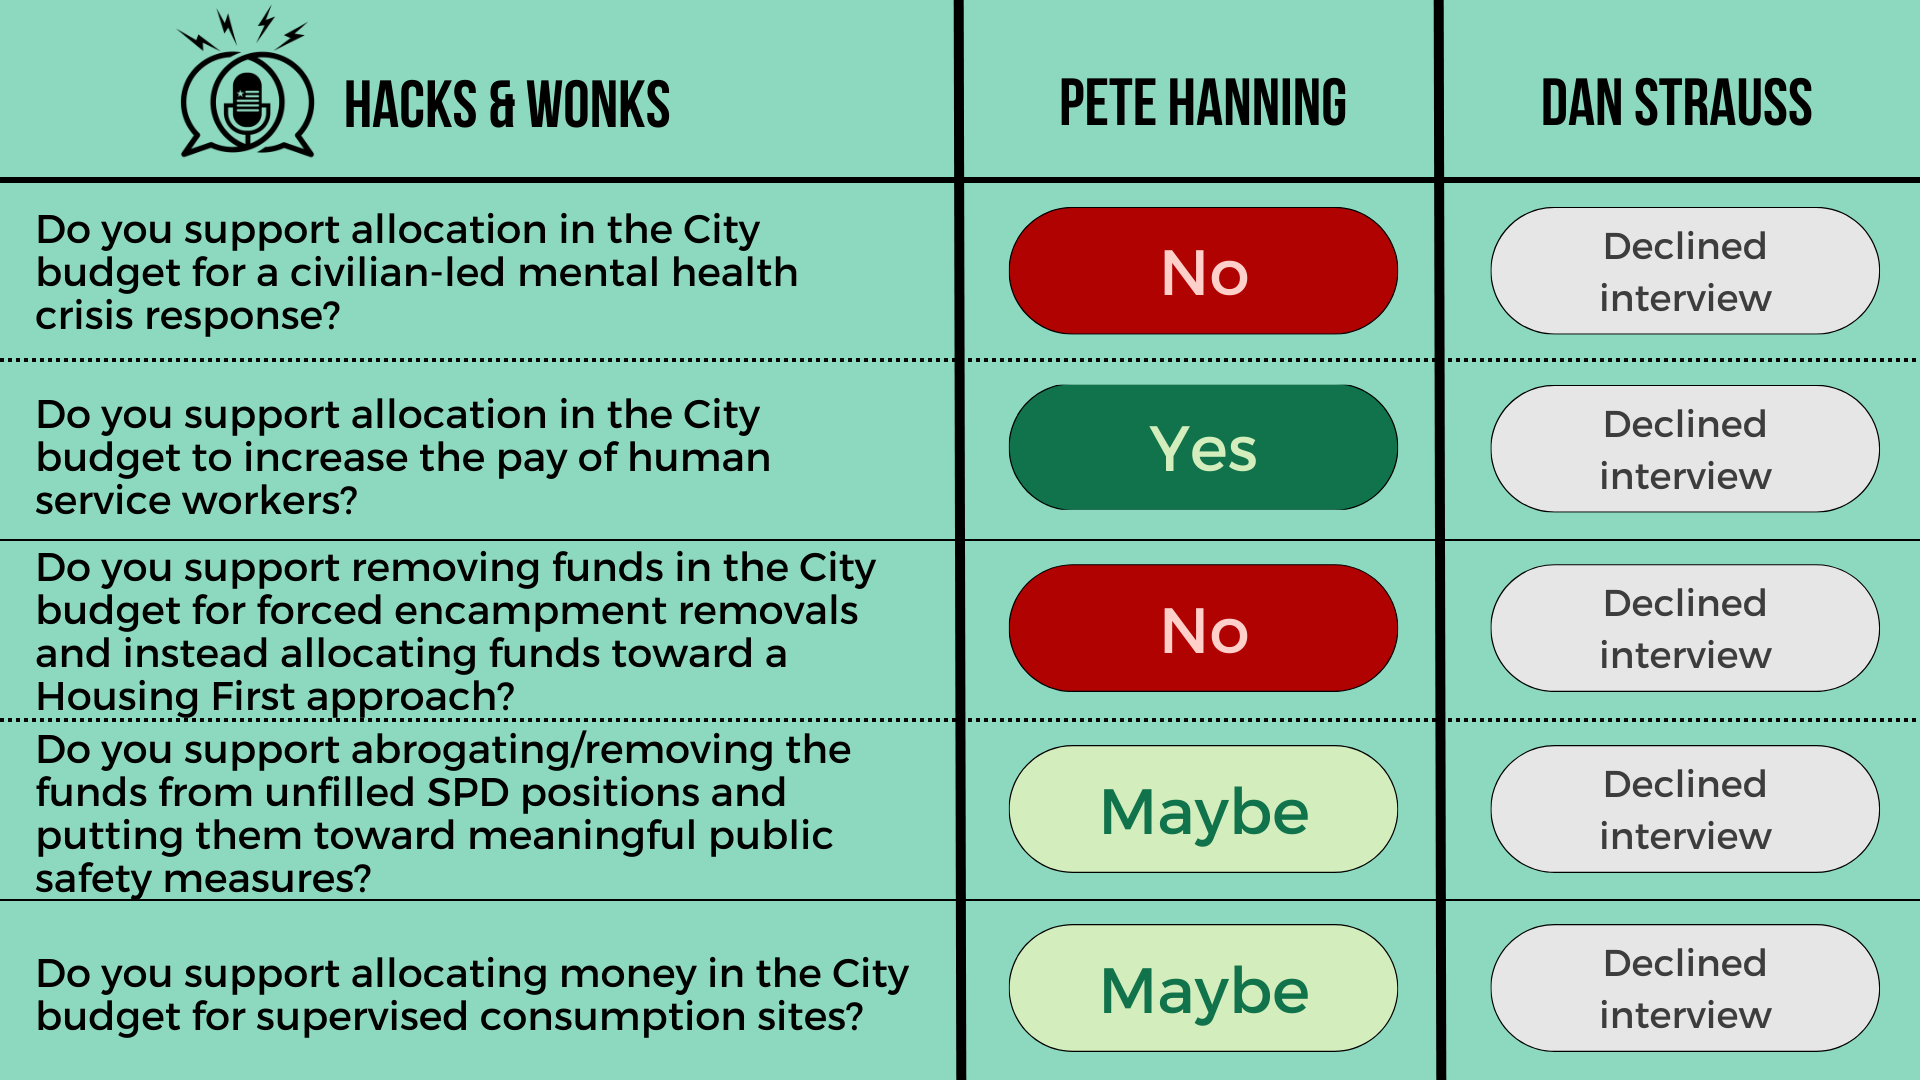 Q: Do you support allocation in the City budget for a civilian-led mental health crisis response? Pete Hanning: No, Dan Strauss: Declined interview  Q: Do you support allocation in the City budget to increase the pay of human service workers? Pete Ha